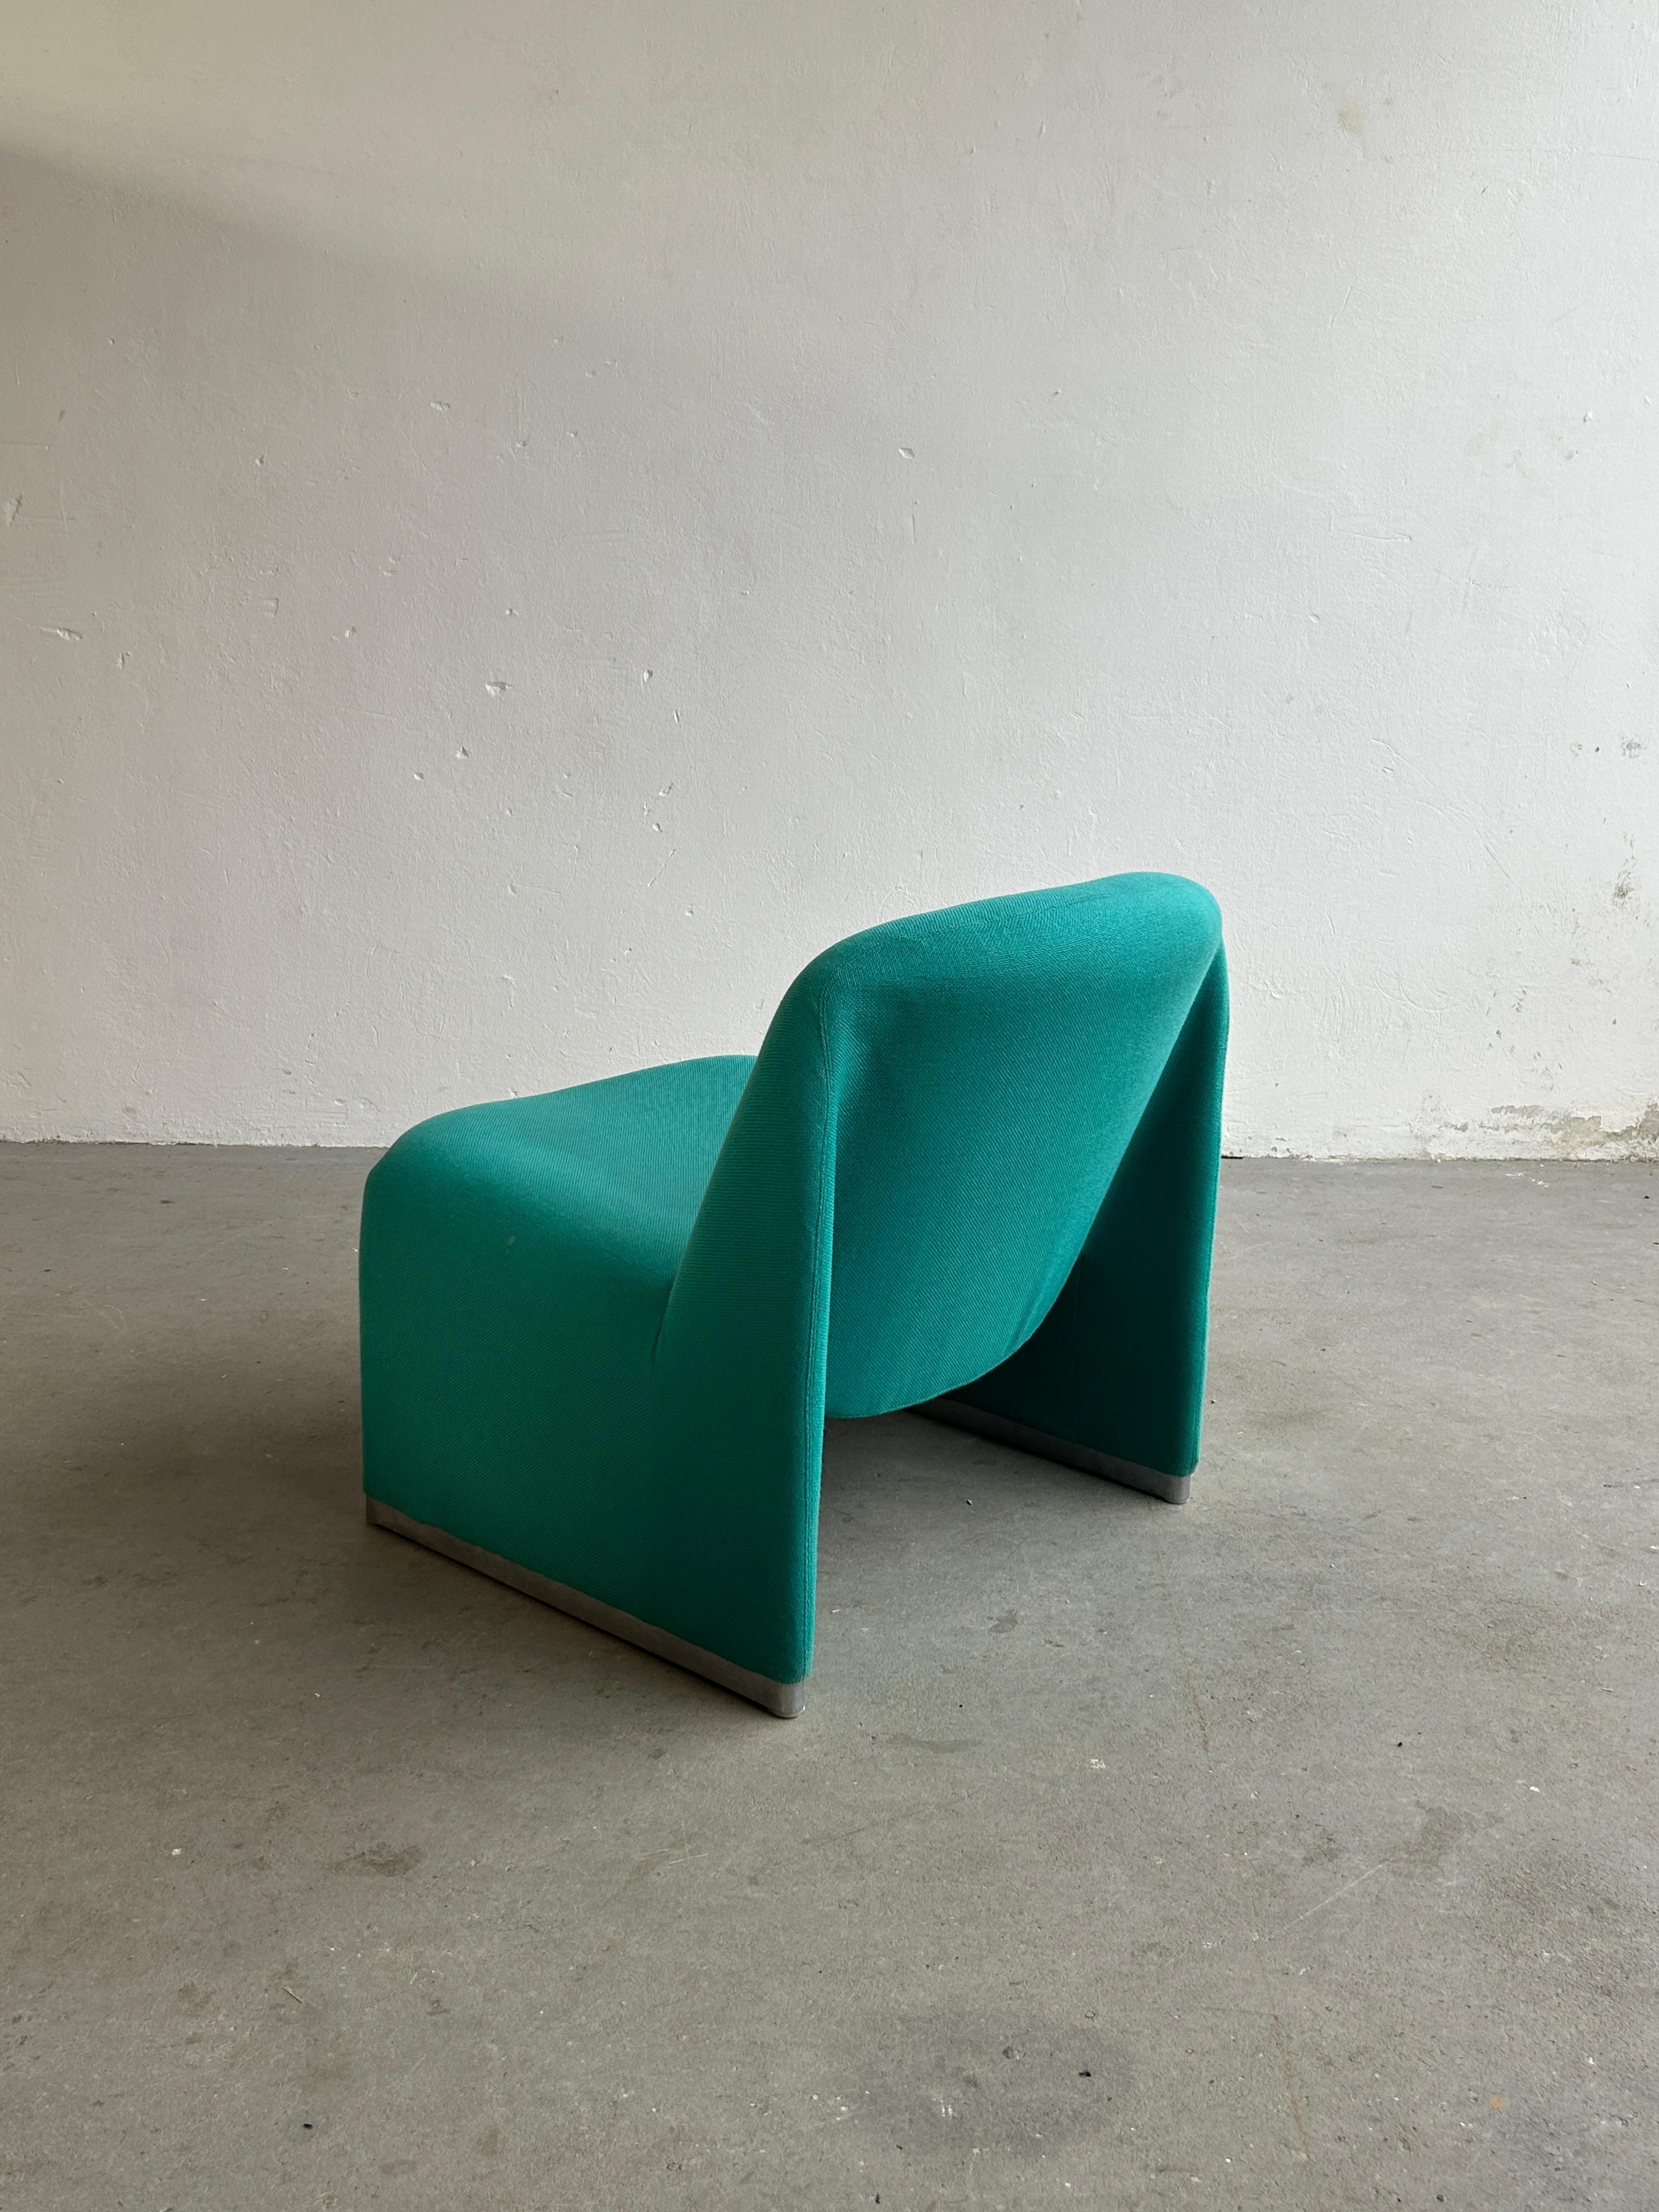 Metal Vintage 'Alky' Chair by Giancarlo Piretti for Anonima Castelli, 1970s, Italy